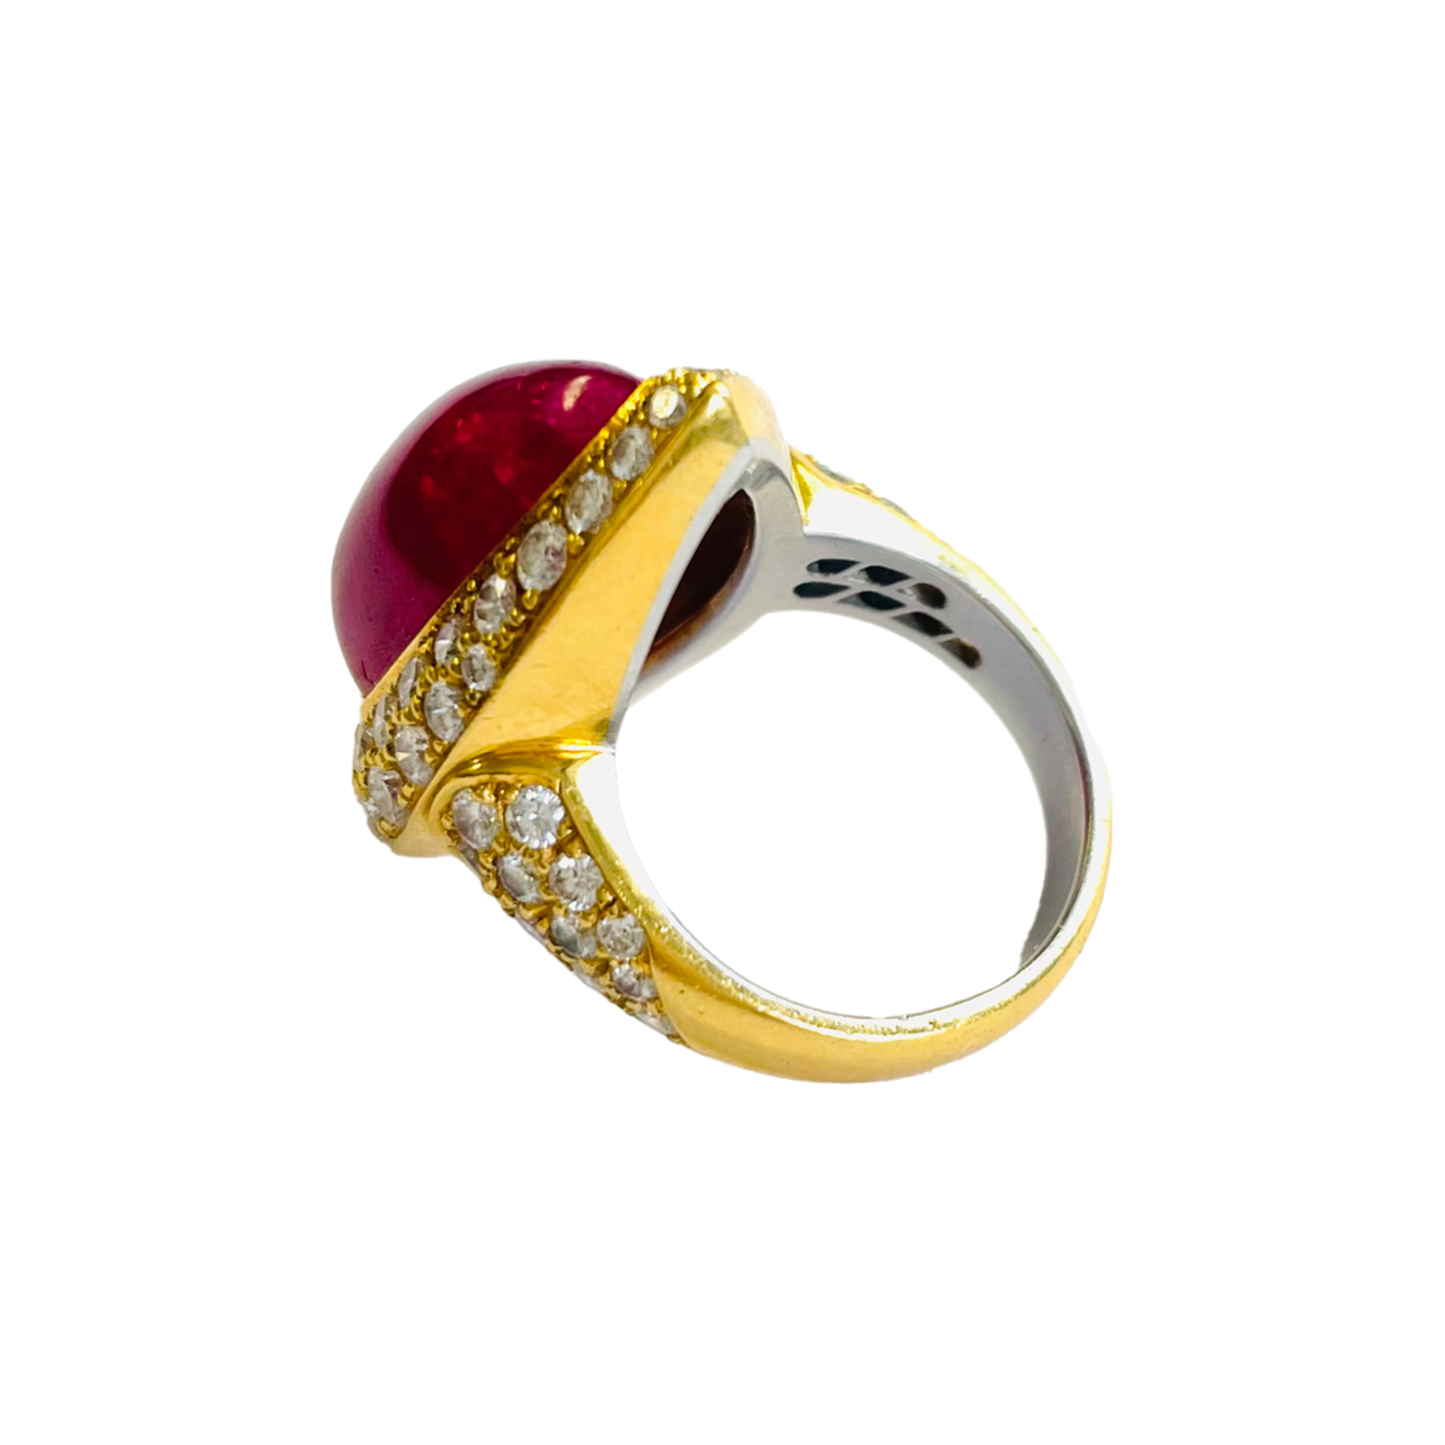 Hemmerle 1980s Platinum & 18KT Yellow Gold African Unheated Ruby & Diamond Ring top